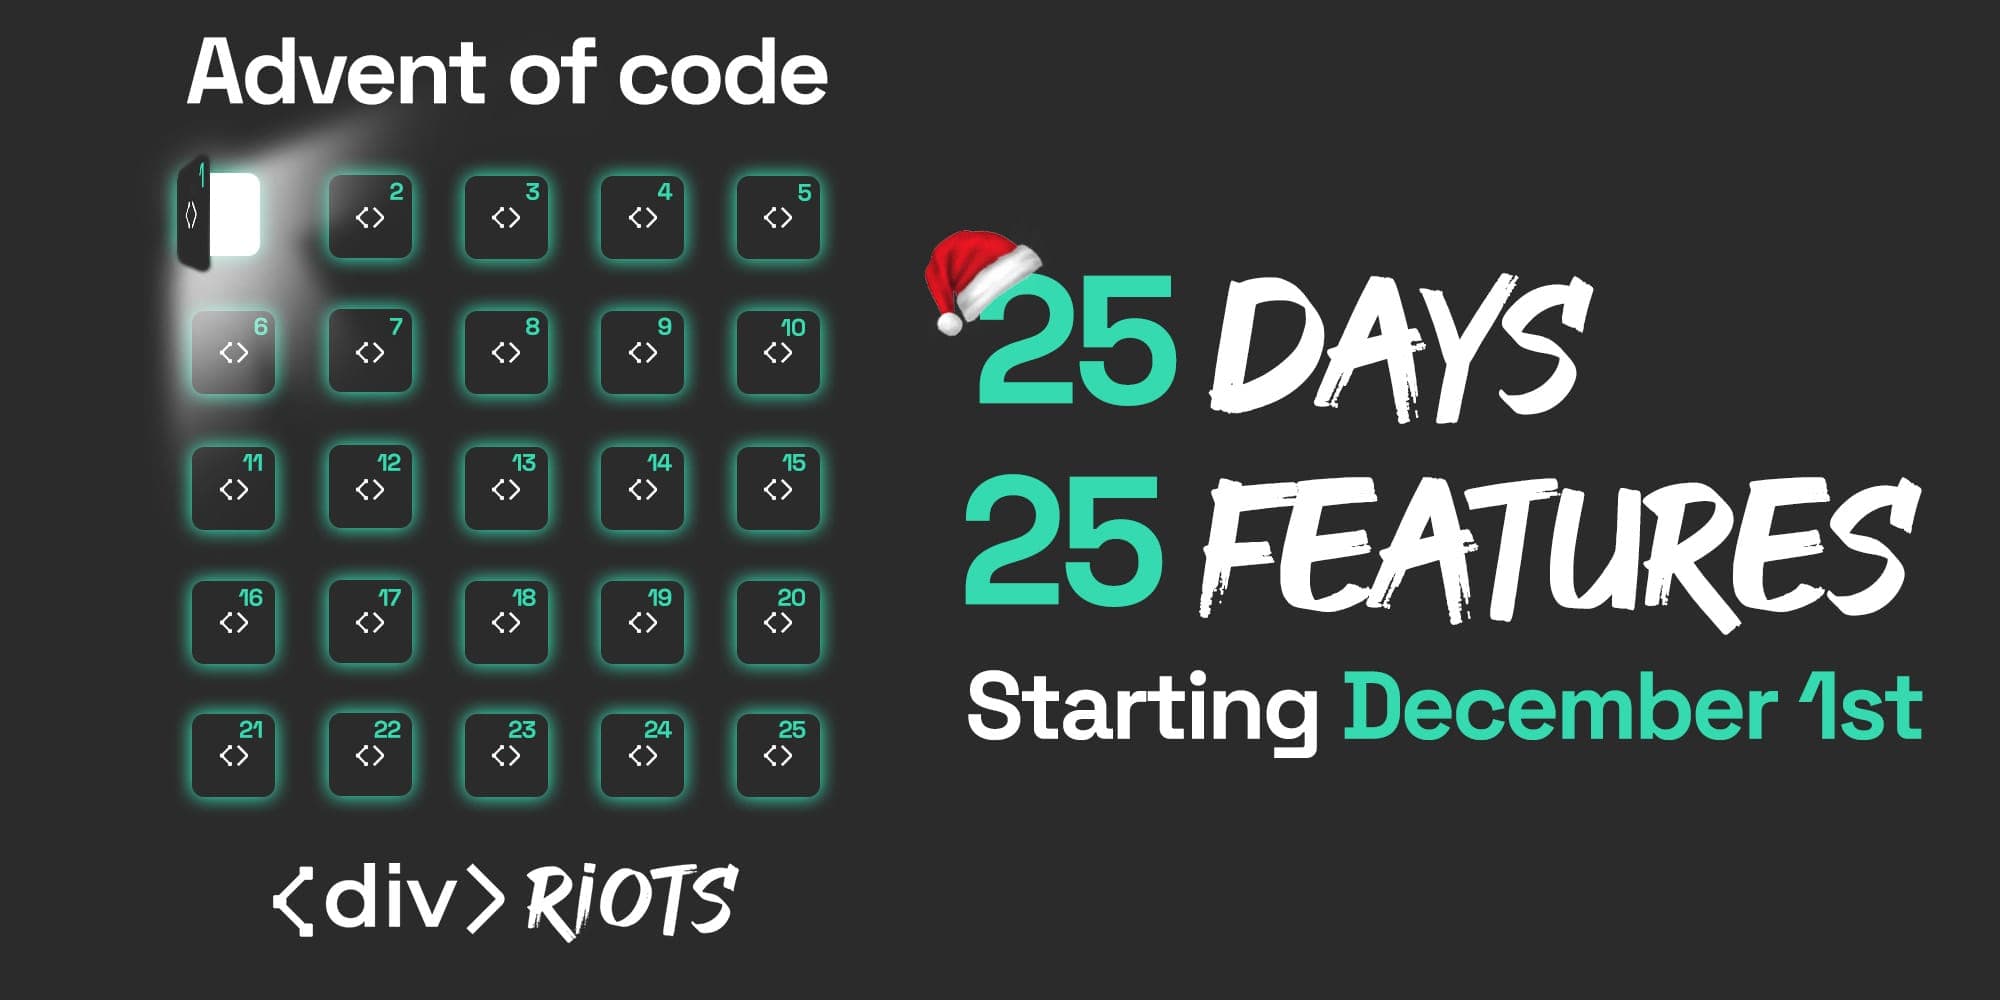 Advent Calendar named "Advent of Code" - 25 days, 25 features, starting December 1st